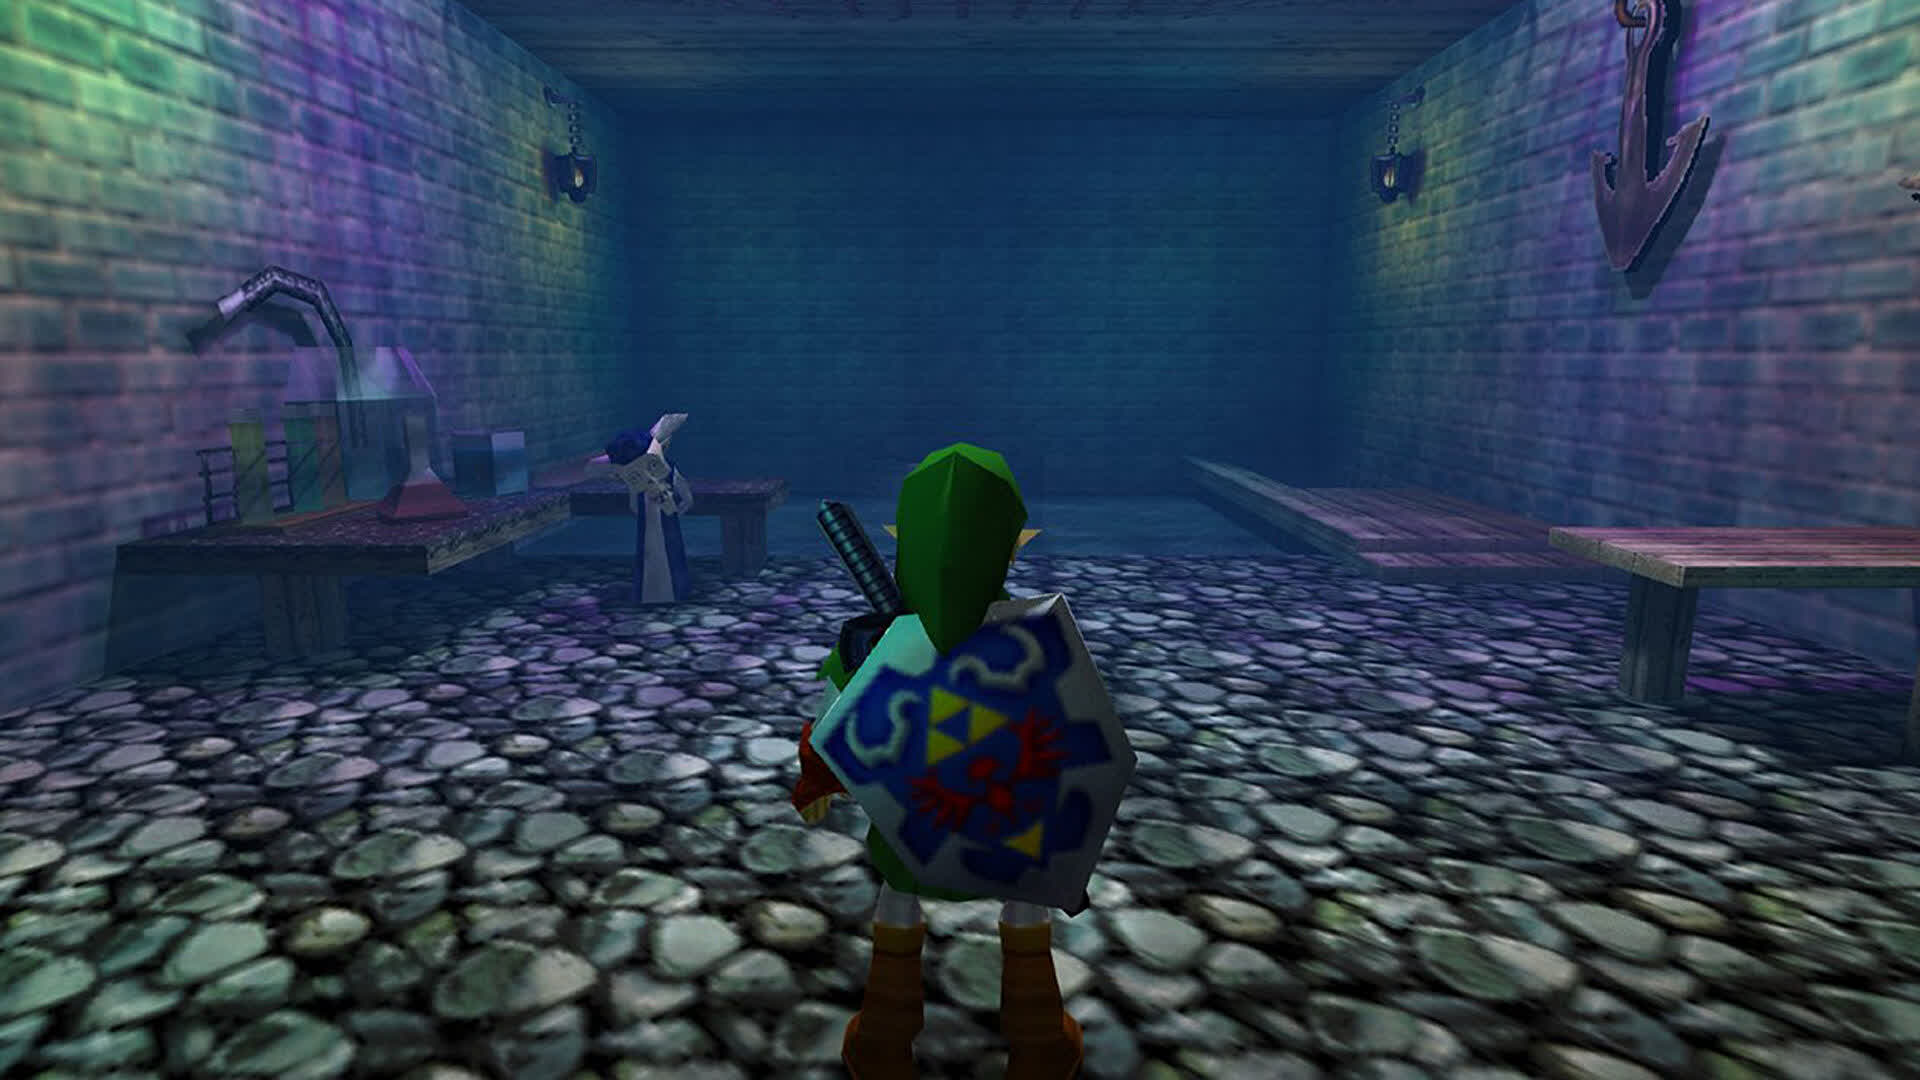 Upcoming emulator plugin will add ray tracing, motion blur, widescreen support and more to classic N64 games